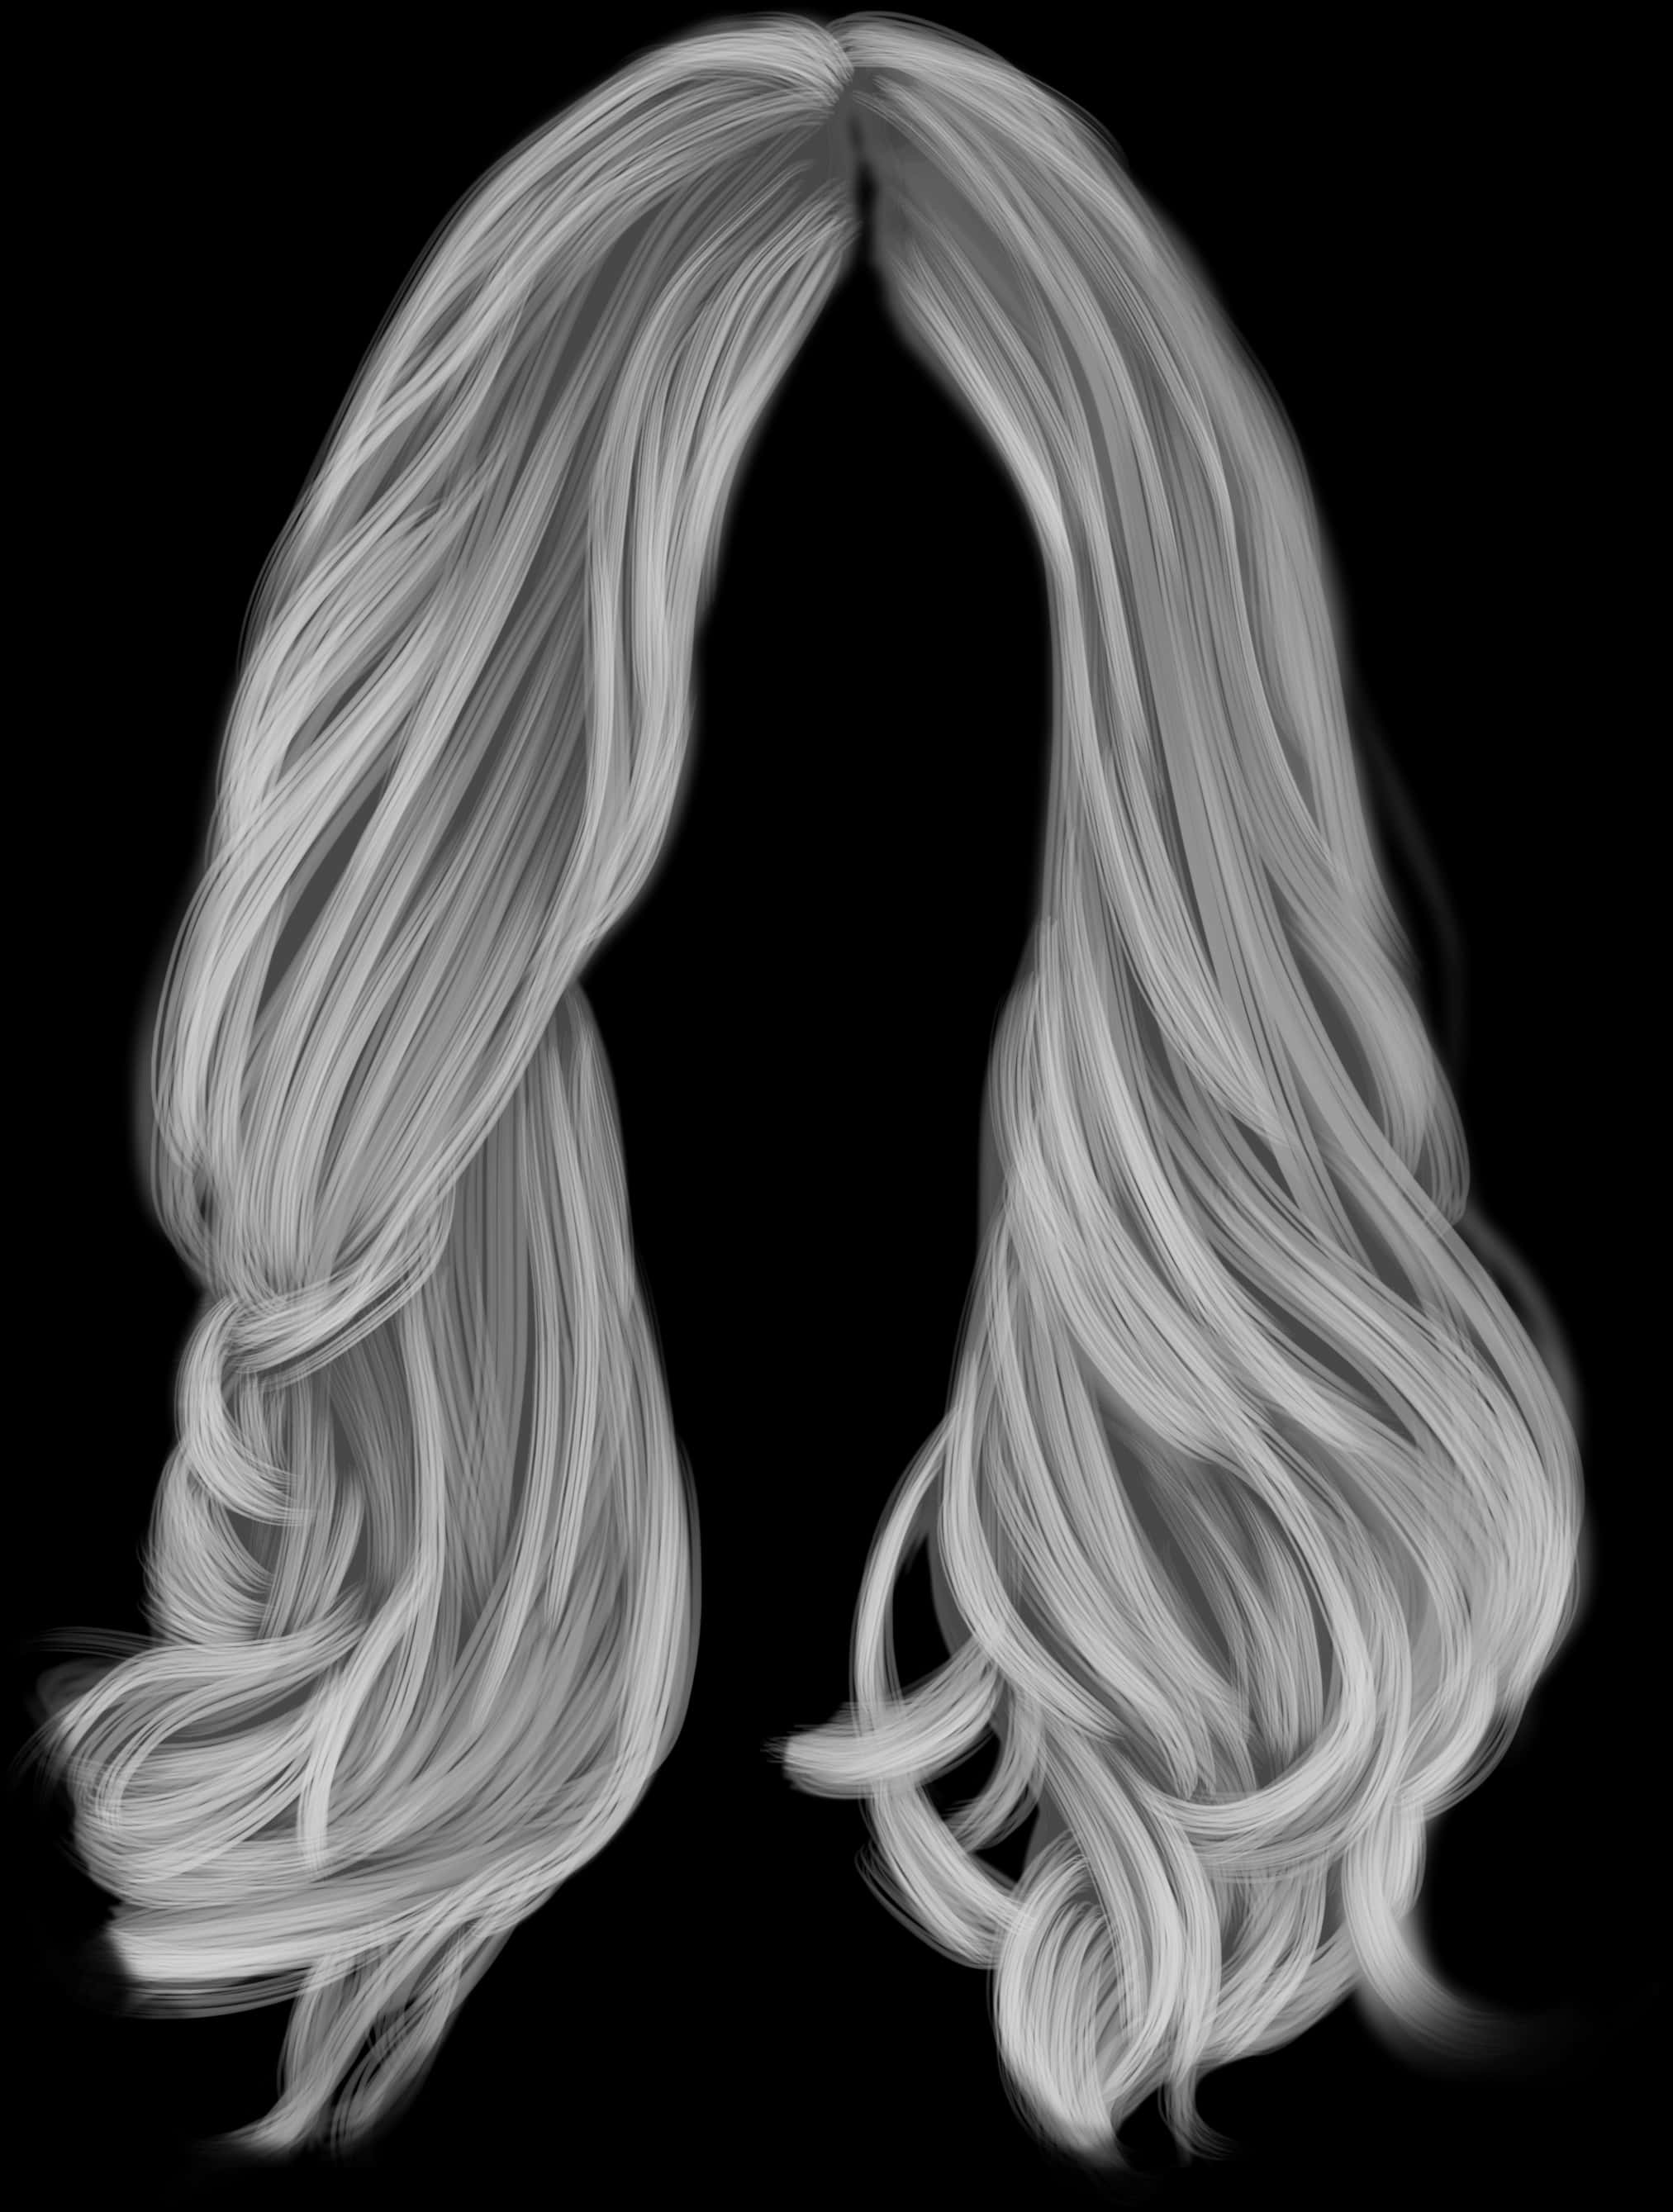 A Long Grey Hair On A Black Background